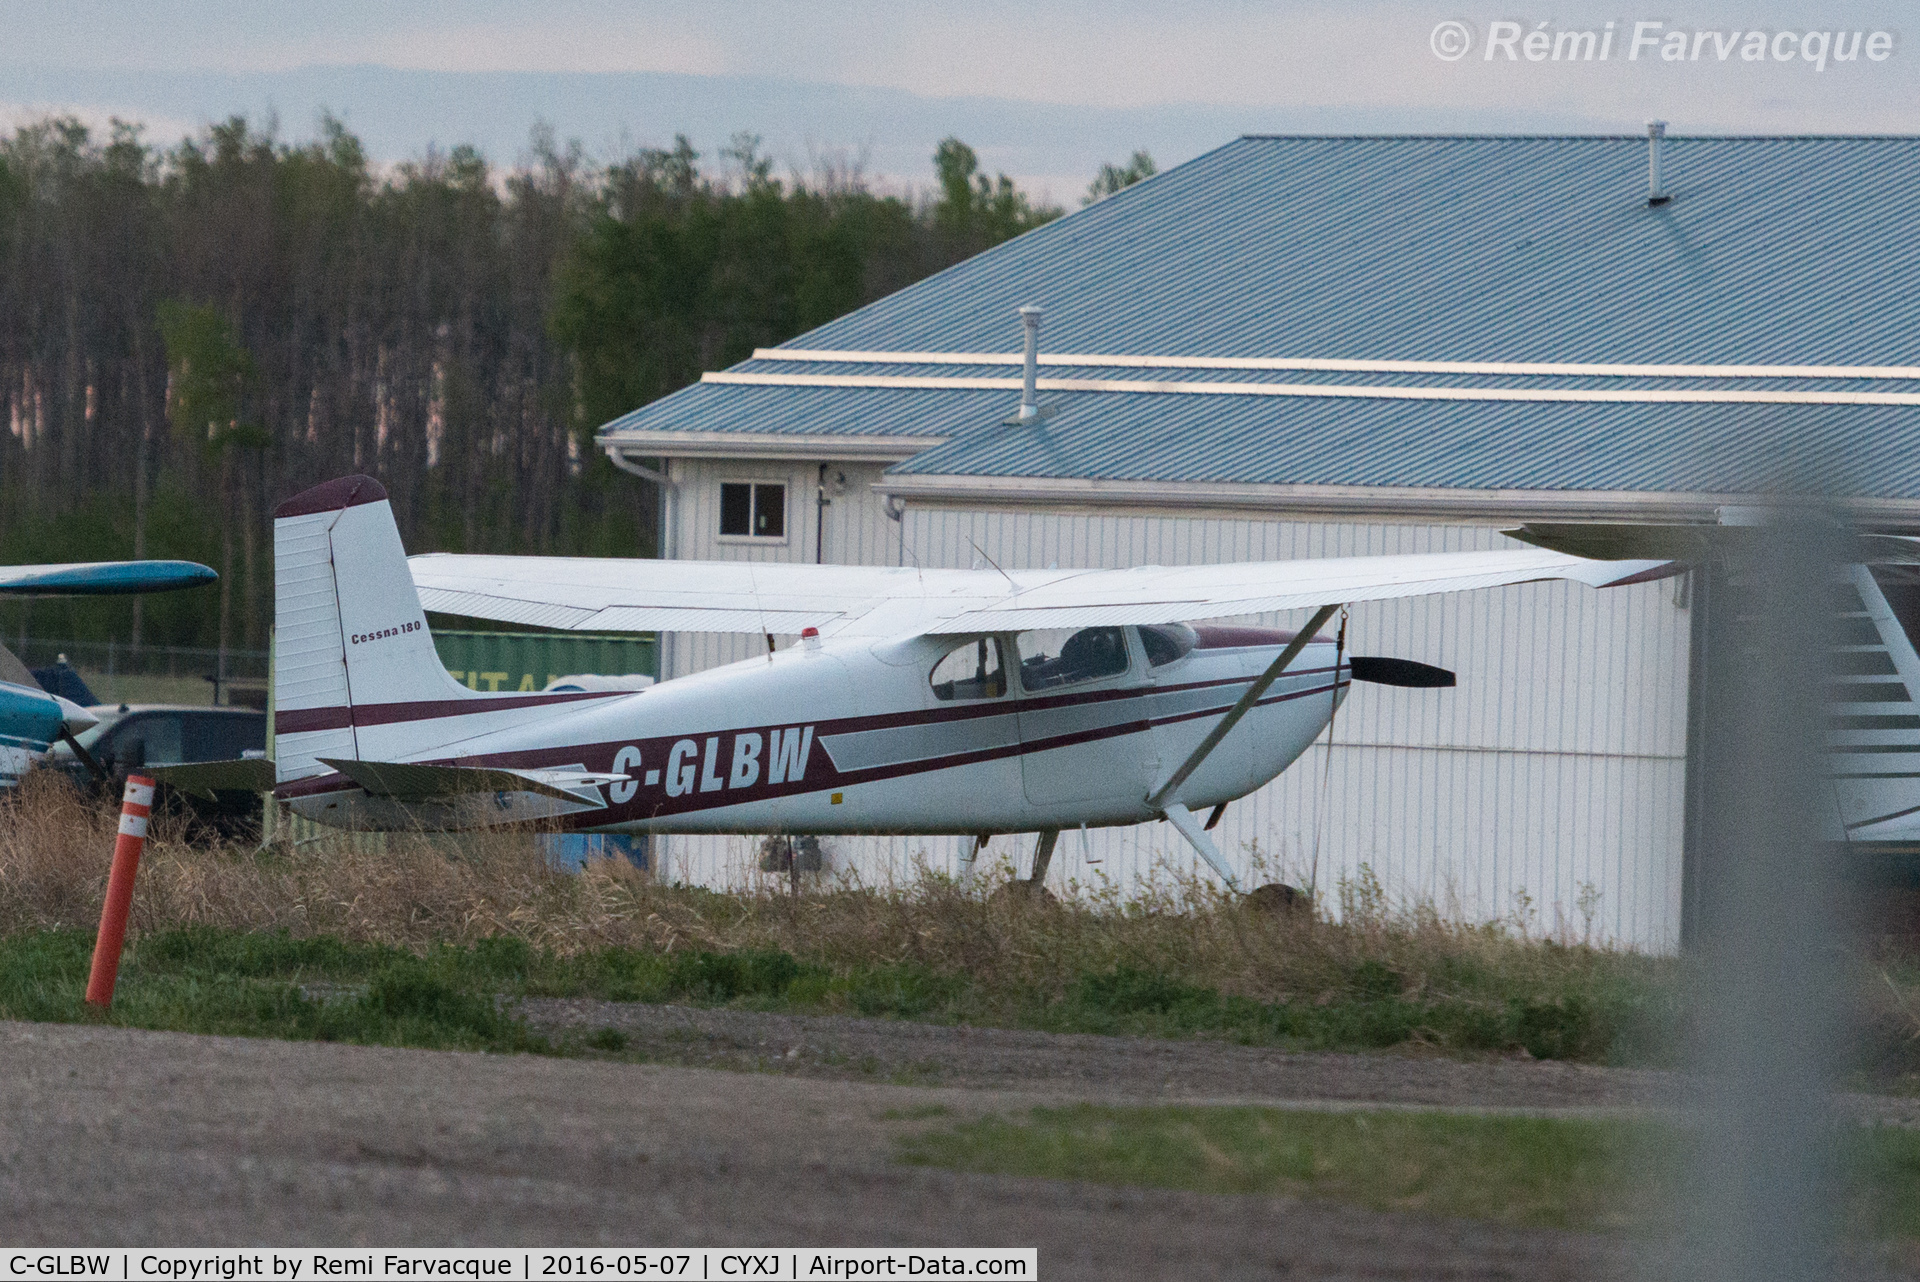 C-GLBW, 1955 Cessna 180 C/N 31935, Parked outside east of main terminal building